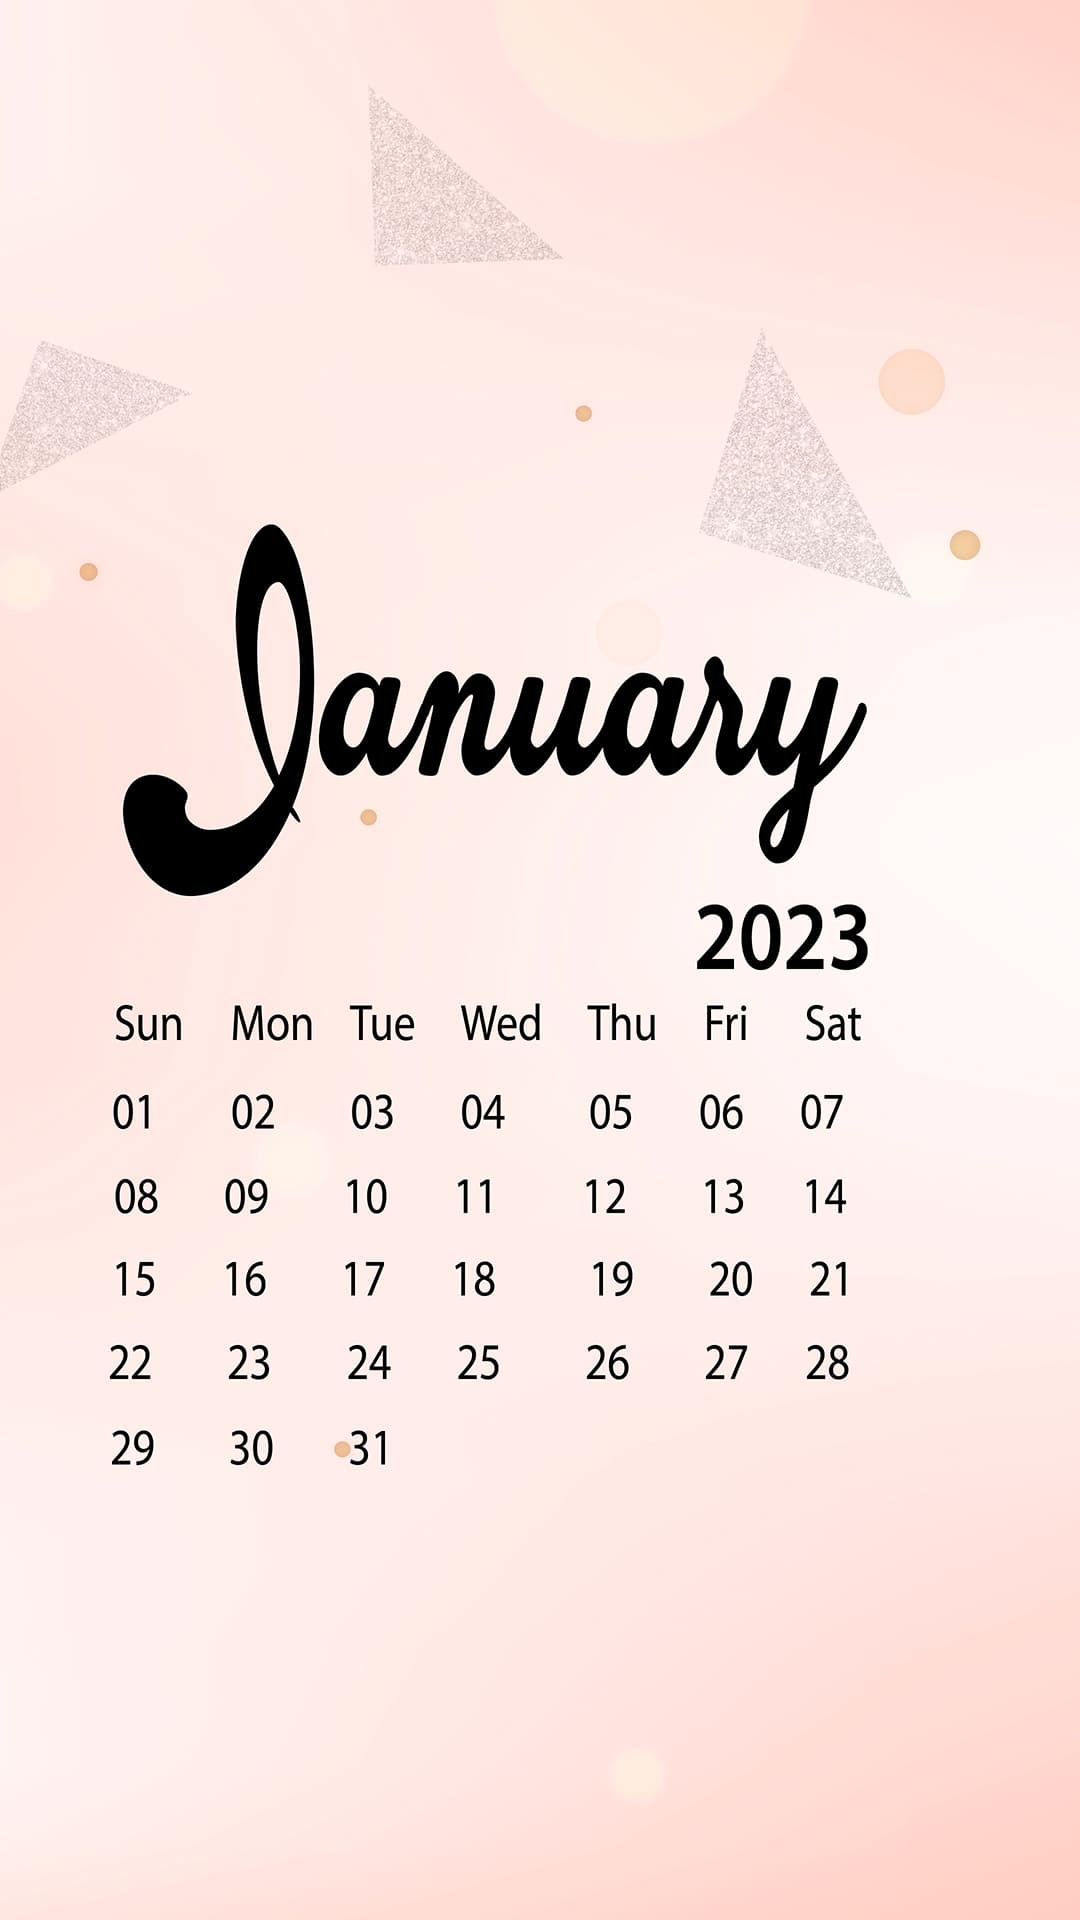 2023 January Wallpapers